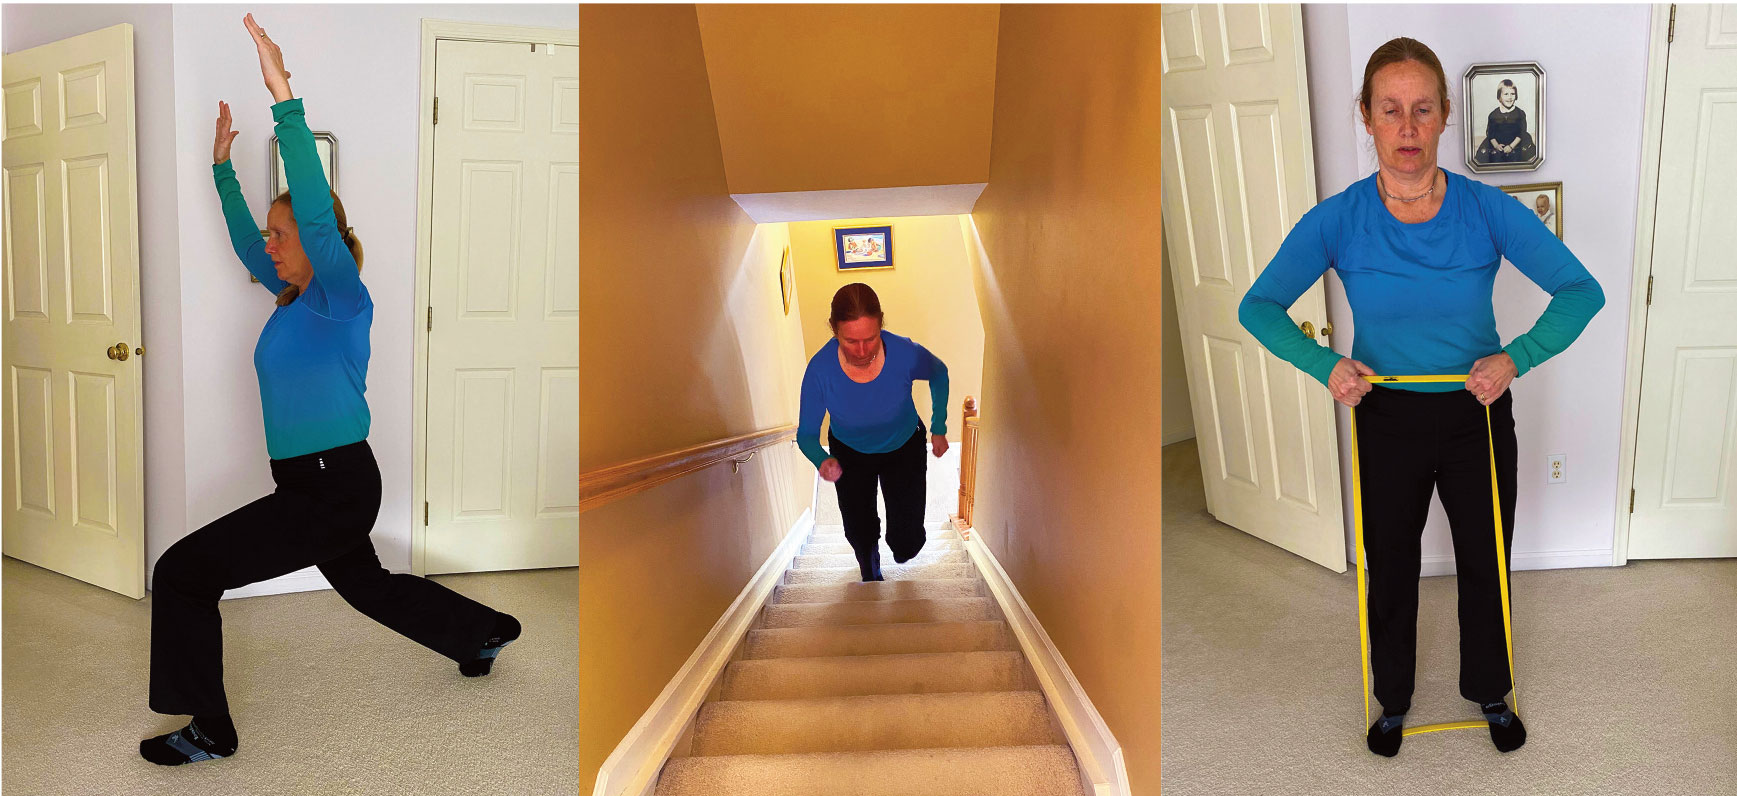 Lunges, going up and down stairs and using an exercise band are a few ways to keep fit while stuck at home, as Carol Sames, PhD, shows here. She directs Upstate's Vitality Fitness Programs. (photos courtesy of Carol Sames)